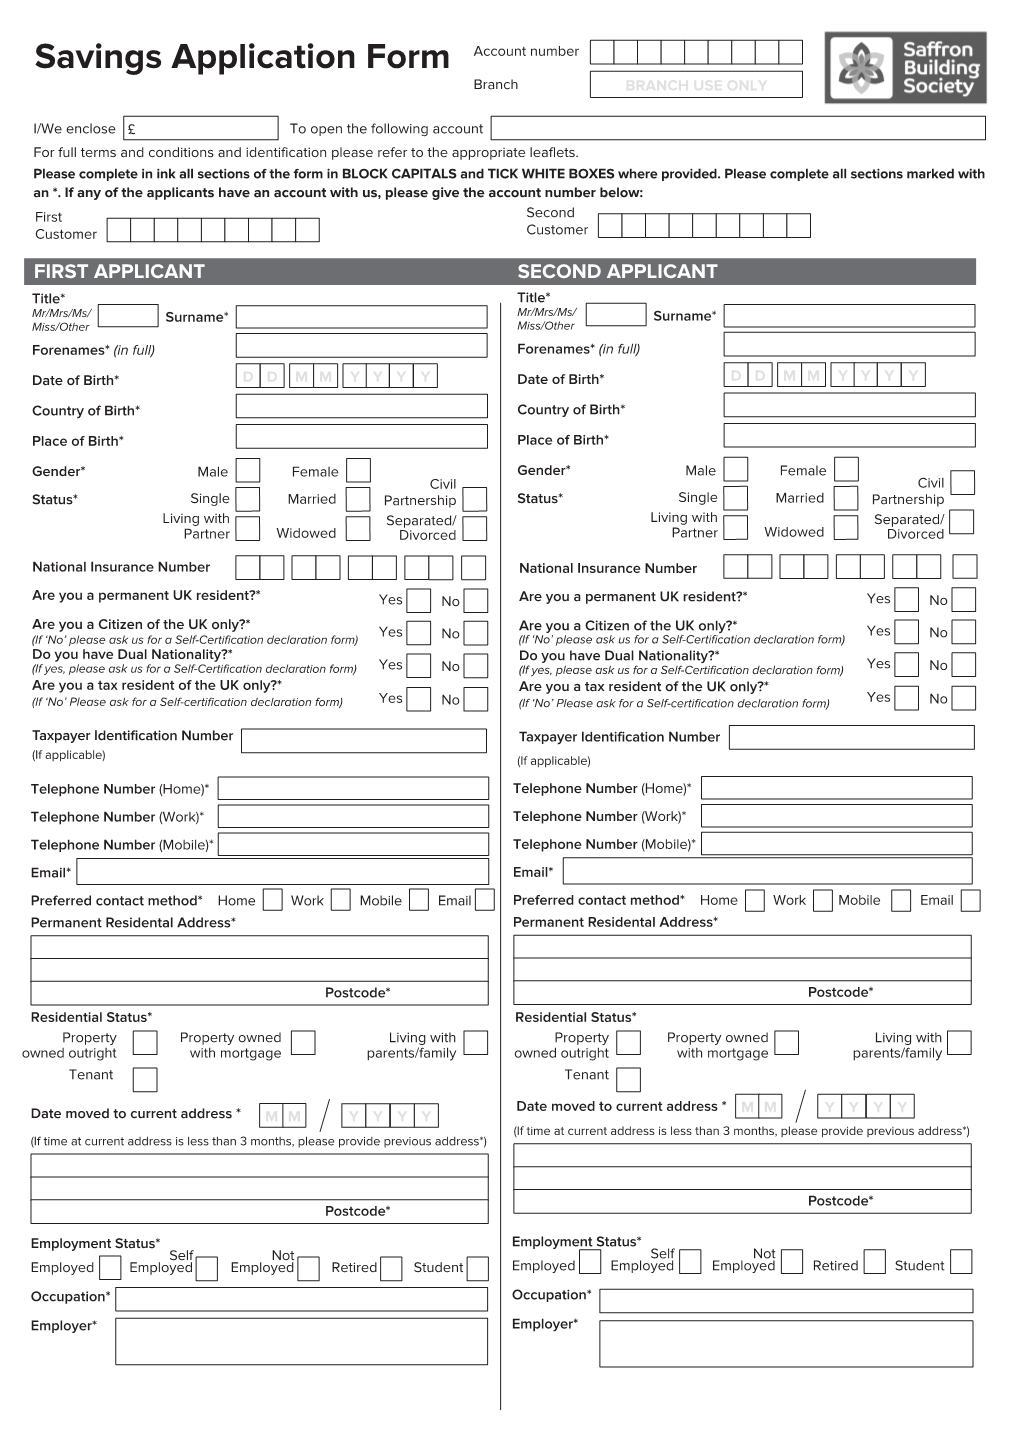 Savings Application Form Branch BRANCH USE ONLY